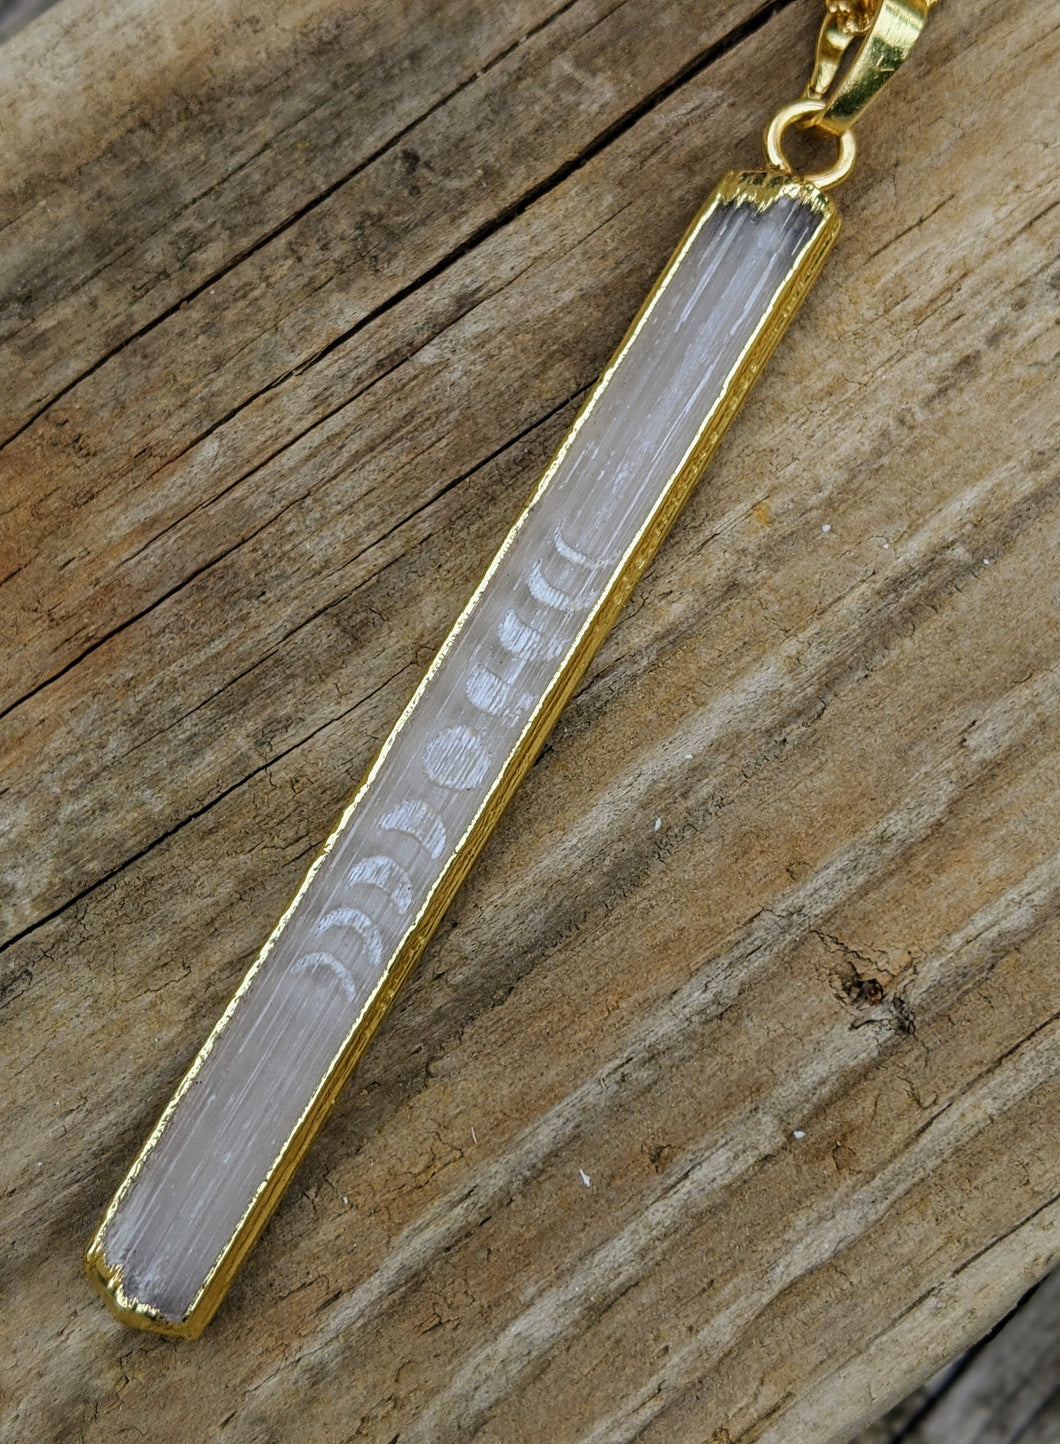 Slightly Imperfect - Engraved Selenite Moon Phase Necklace - Vertical Bar III - Minxes' Trinkets